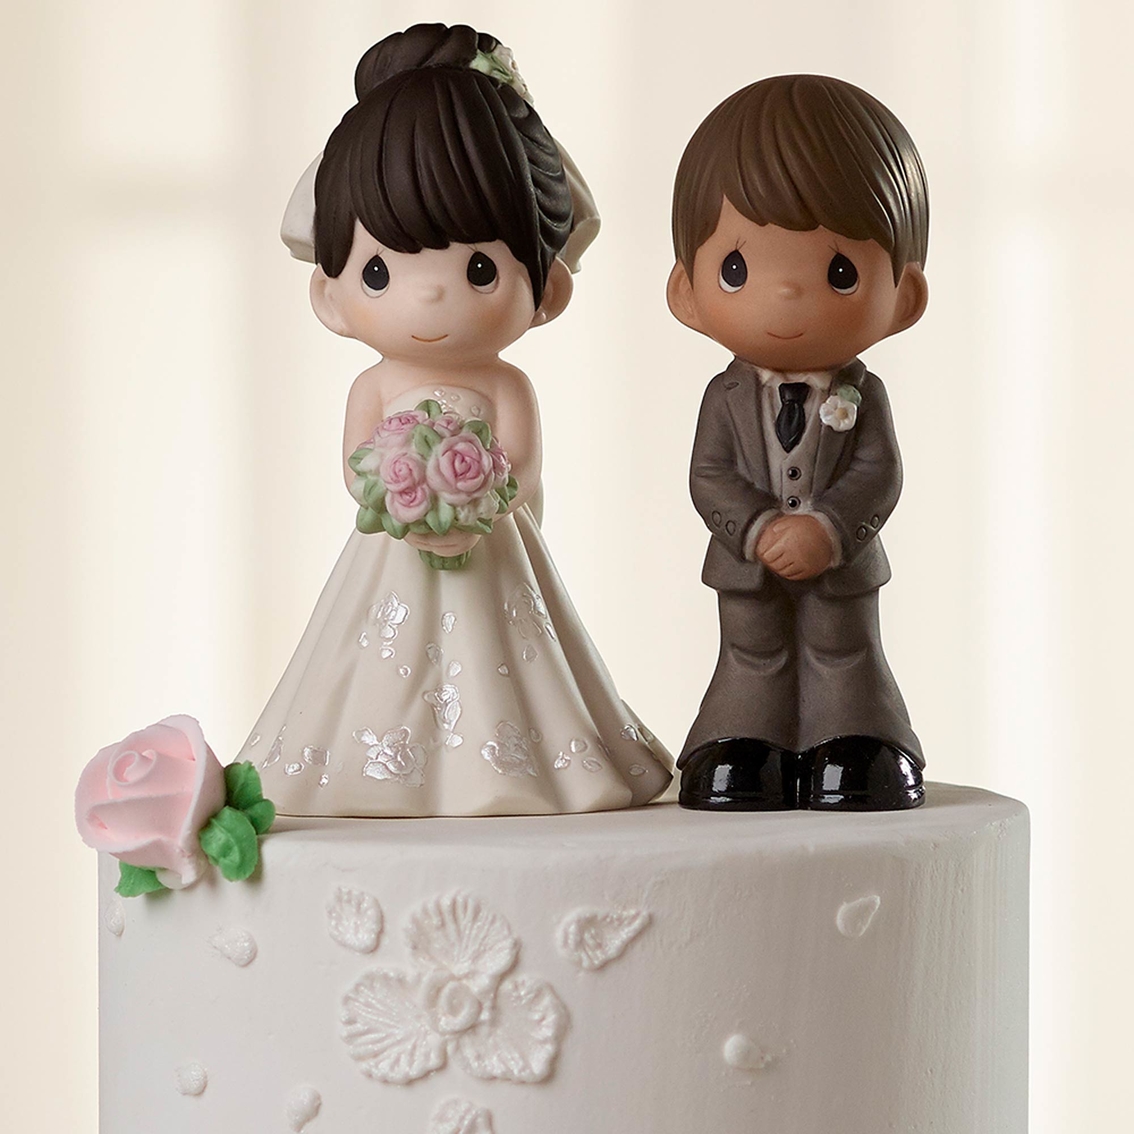 Precious Moments Mix and Match Bride Figurine, Black Hair, Light Skin Tone - Image 4 of 4